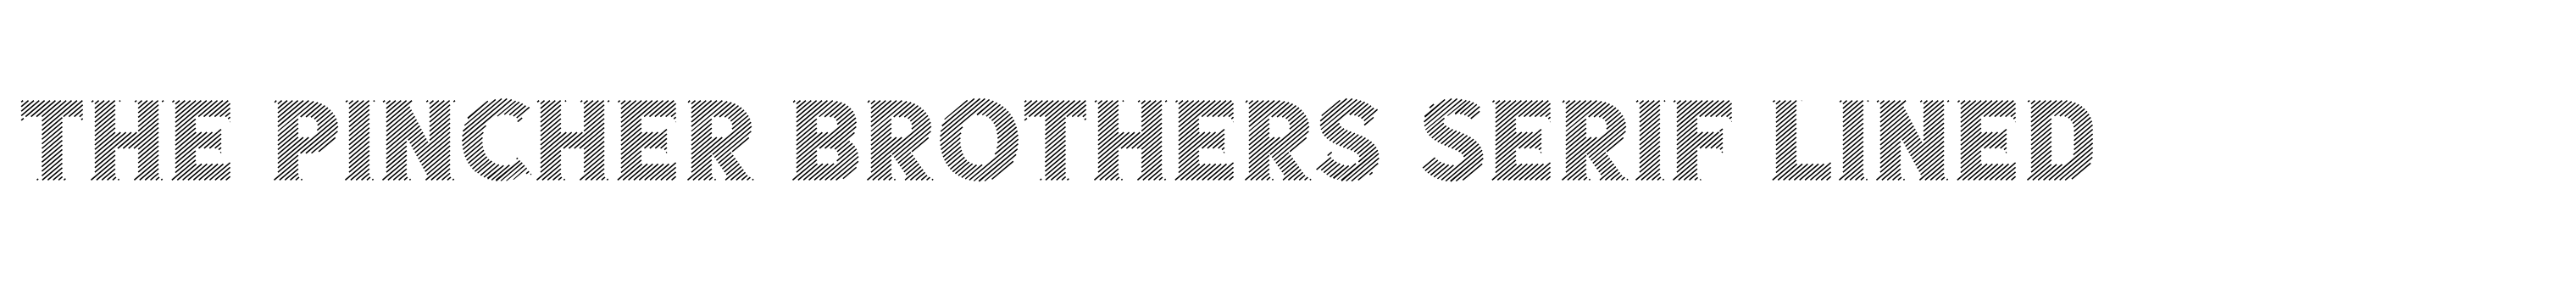 The Pincher Brothers Serif Lined